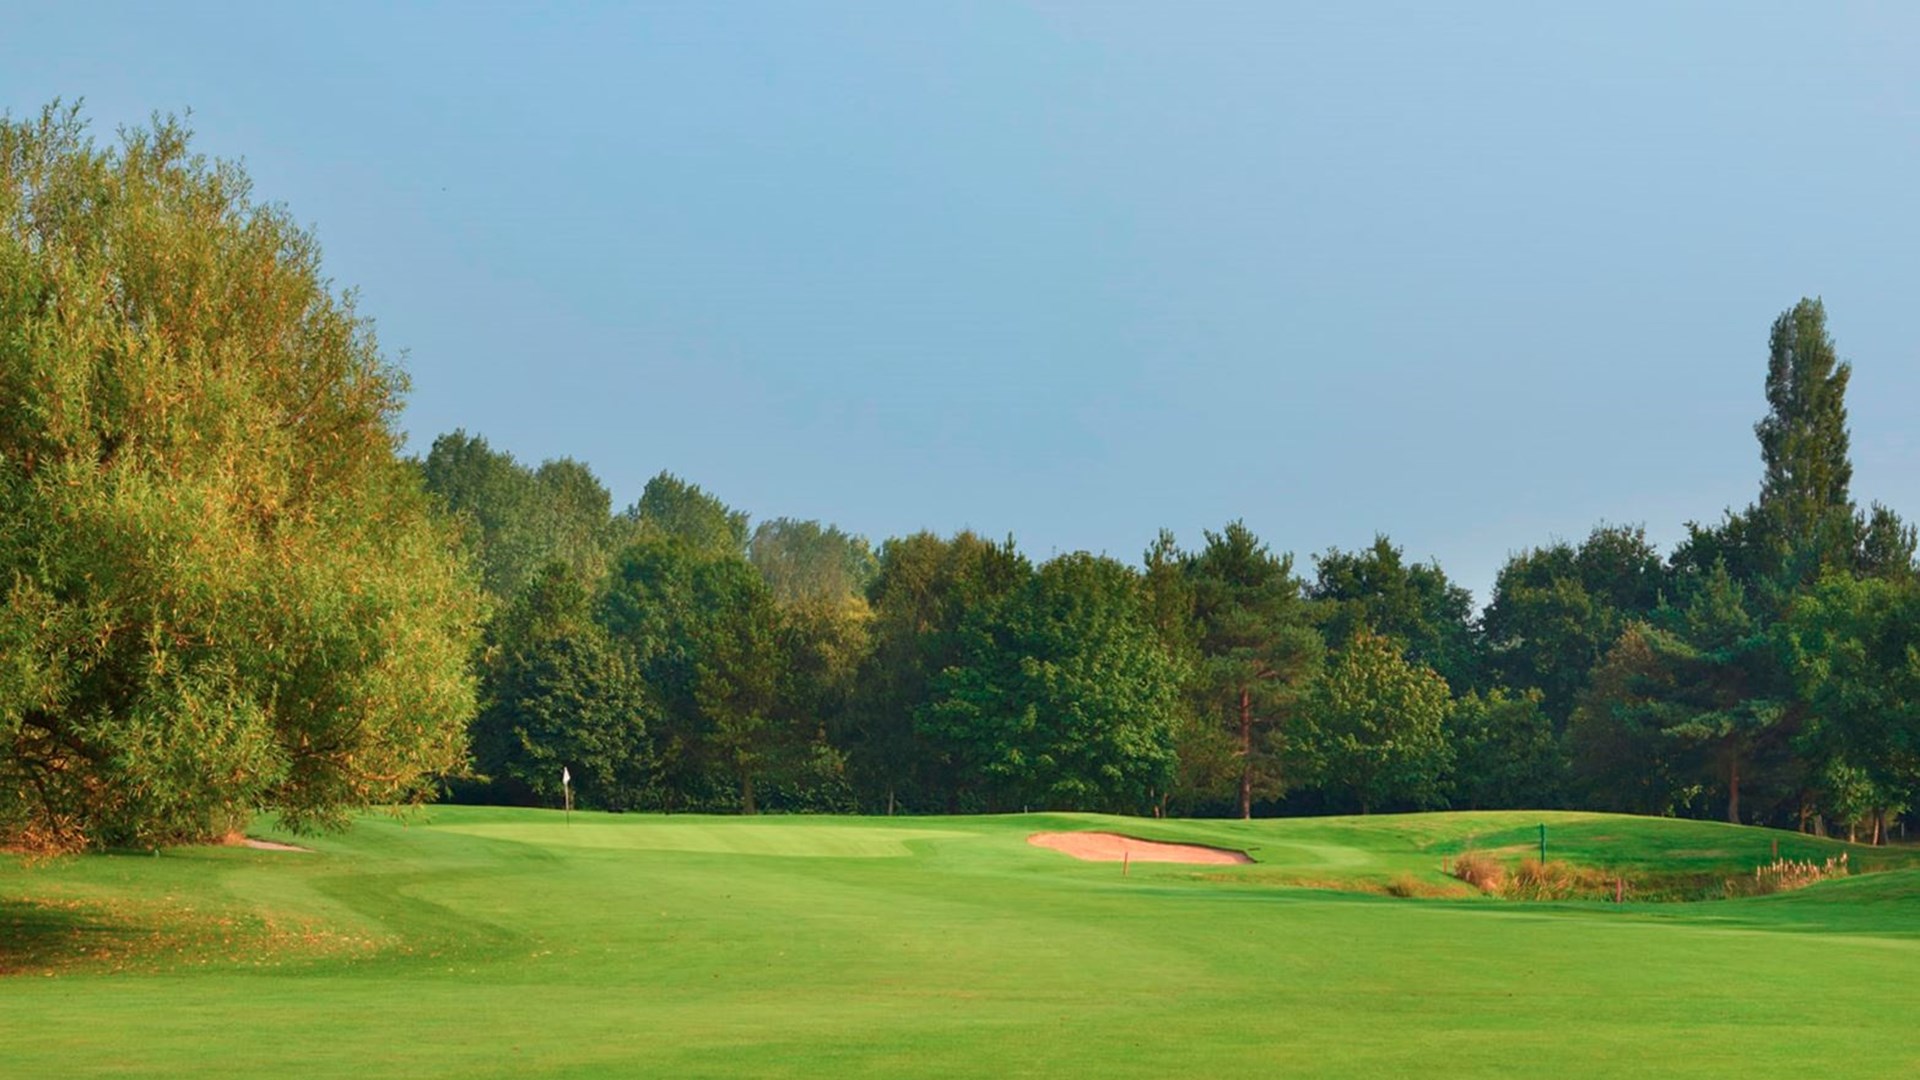 The Derby Golf Course at The Belfry